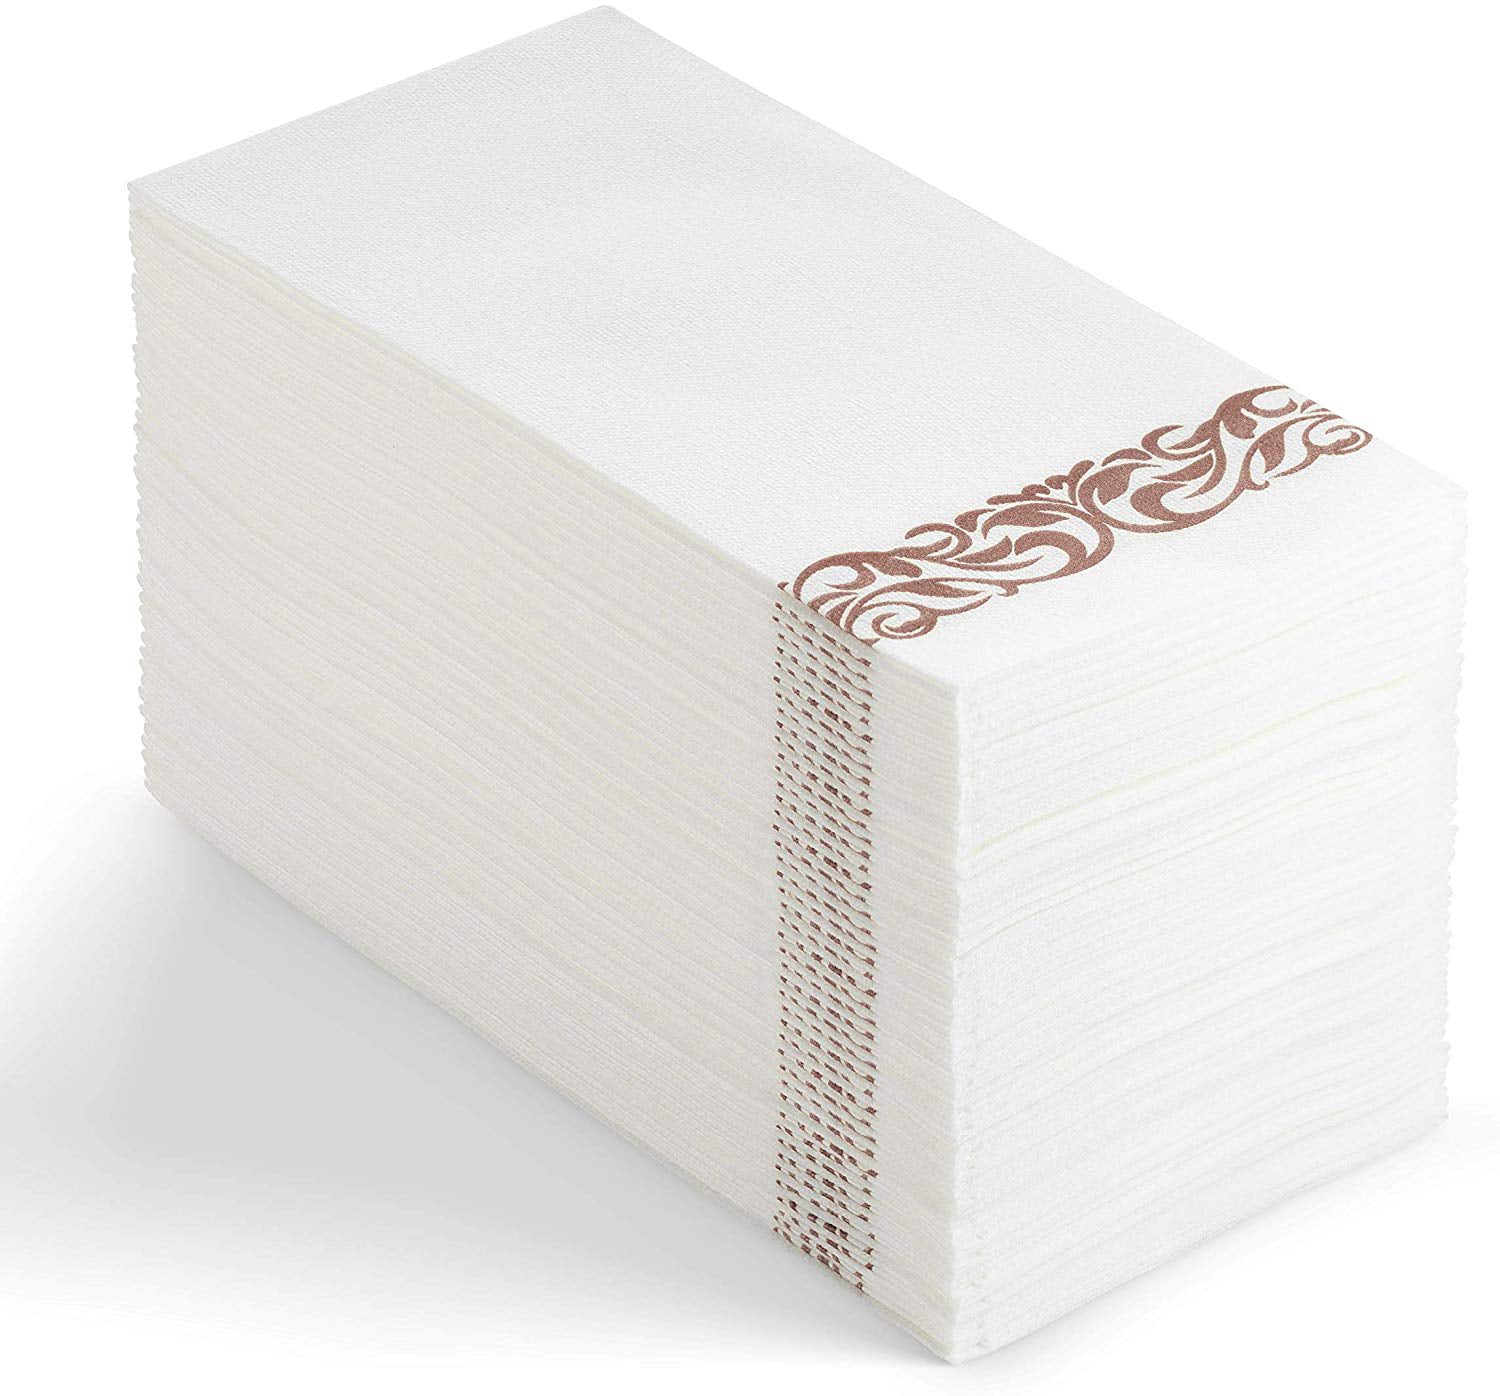 100 Disposable Guest Towels Soft And, Decorative Disposable Hand Towels For Bathroom